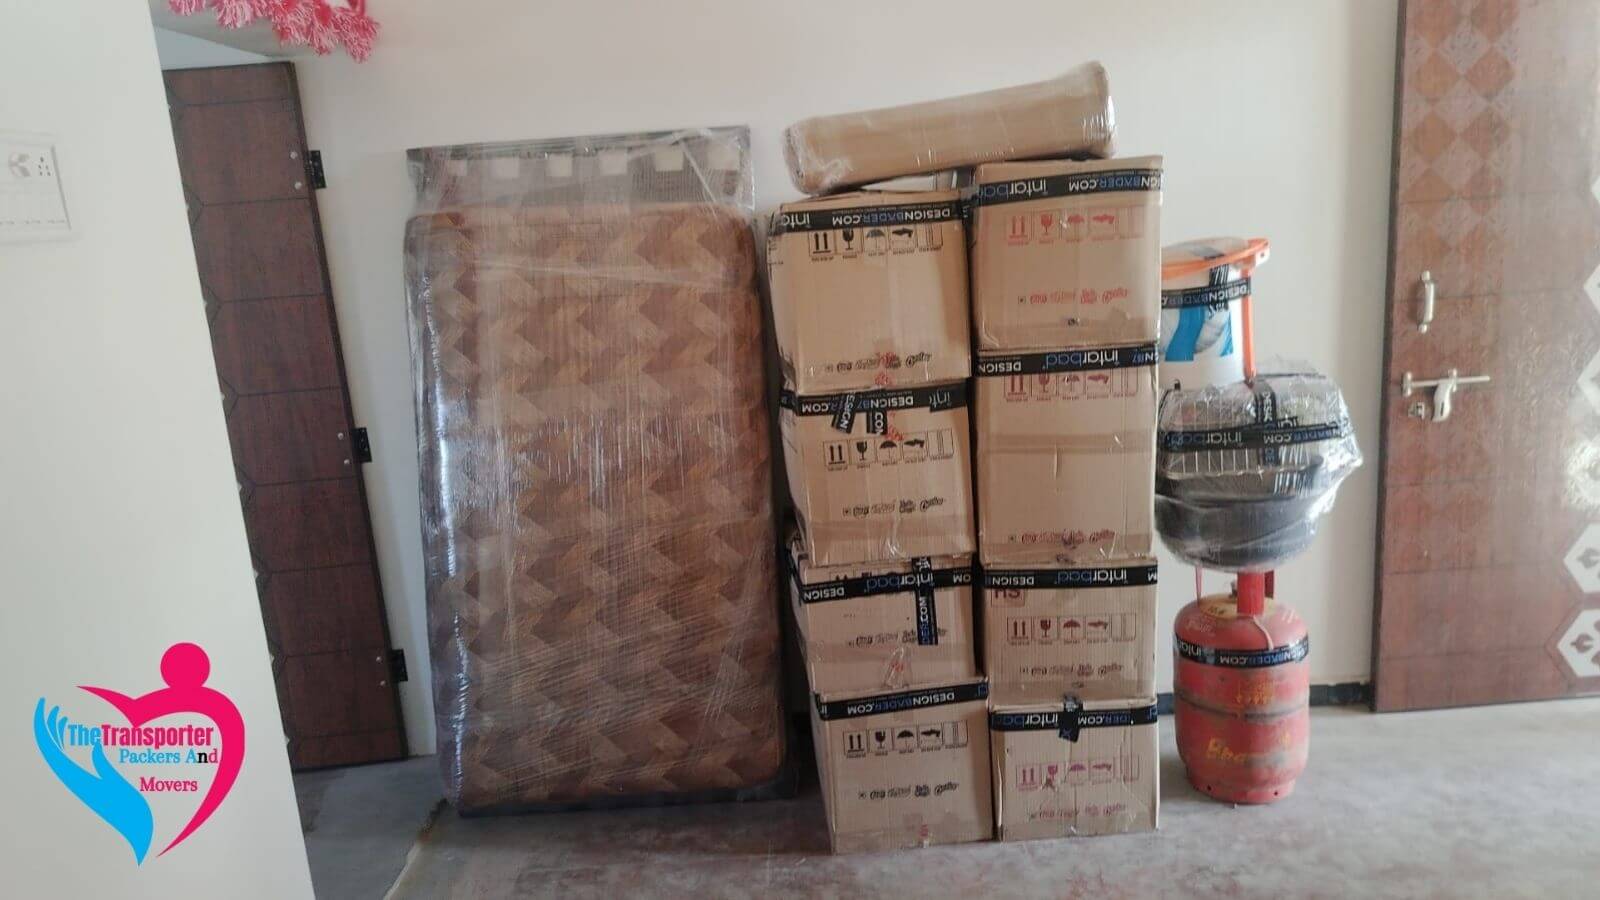 TheTransporter Packers and Movers in Rajkot - Our Commitment to You